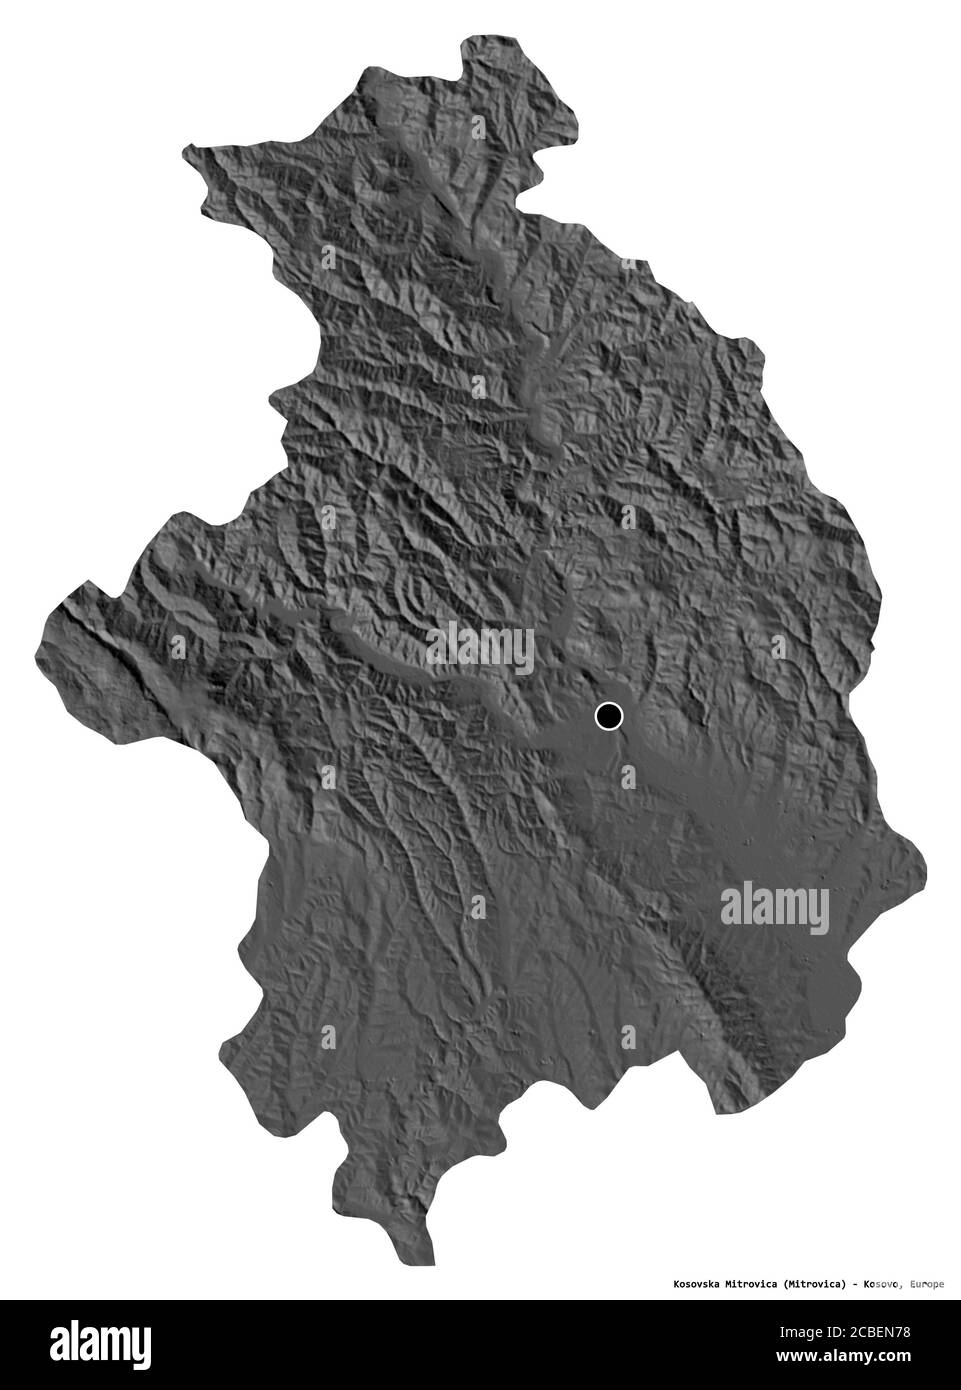 Shape of Kosovska Mitrovica, district of Kosovo, with its capital isolated on white background. Bilevel elevation map. 3D rendering Stock Photo